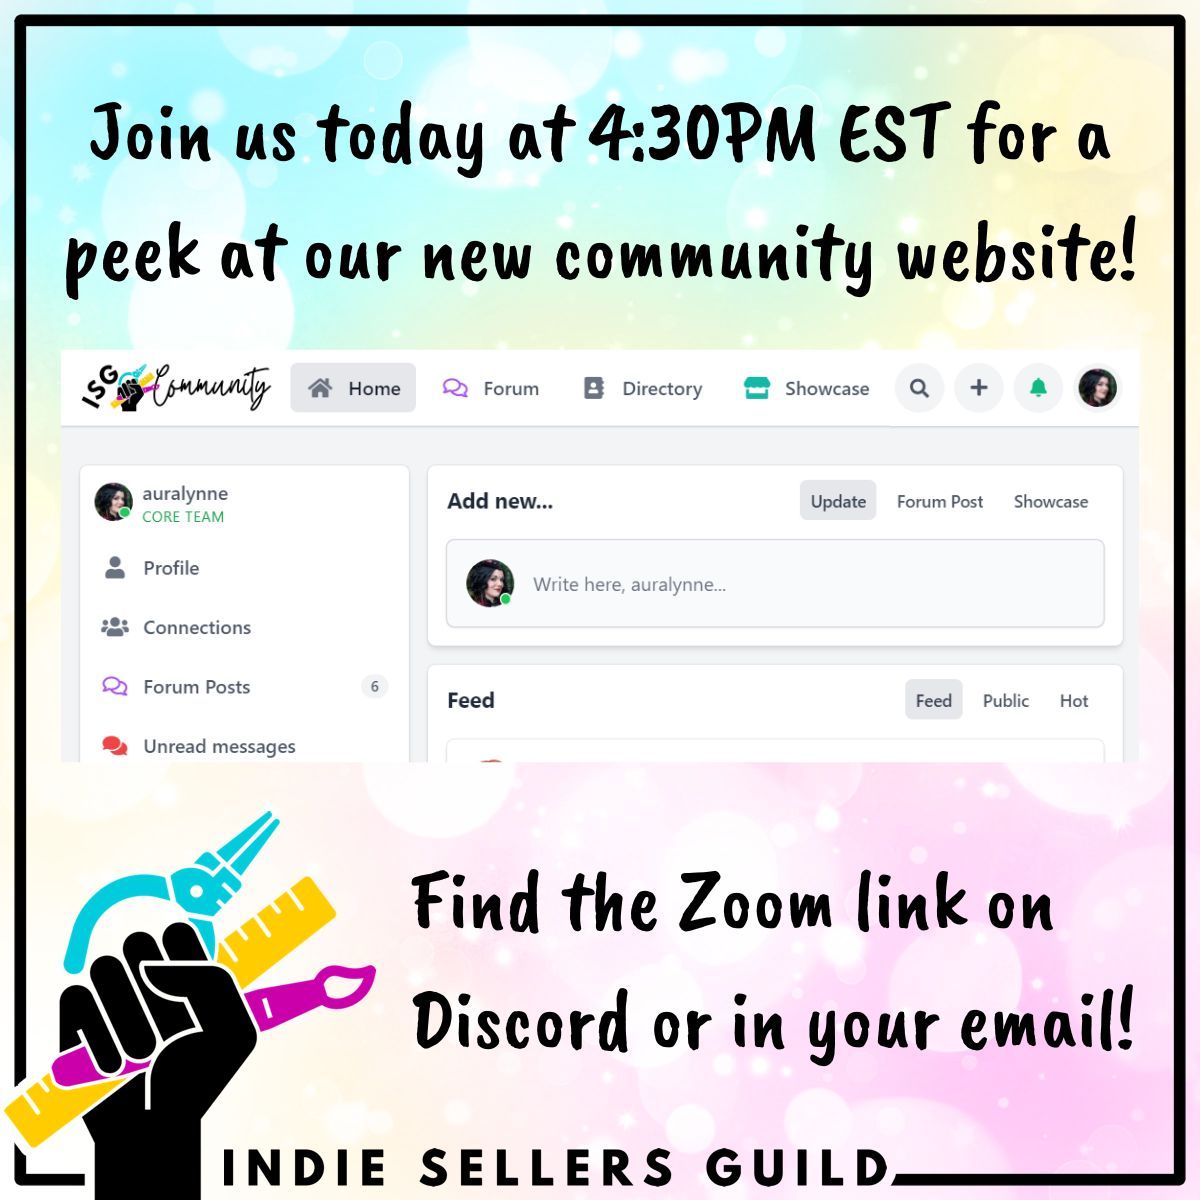 Today we'll be screensharing a peek of our new community website in our all-guild meeting! Find the Zoom link on Discord or in your email! Hope to see you soon. #indiesellersguild #supportsmallbusiness #indiestrong